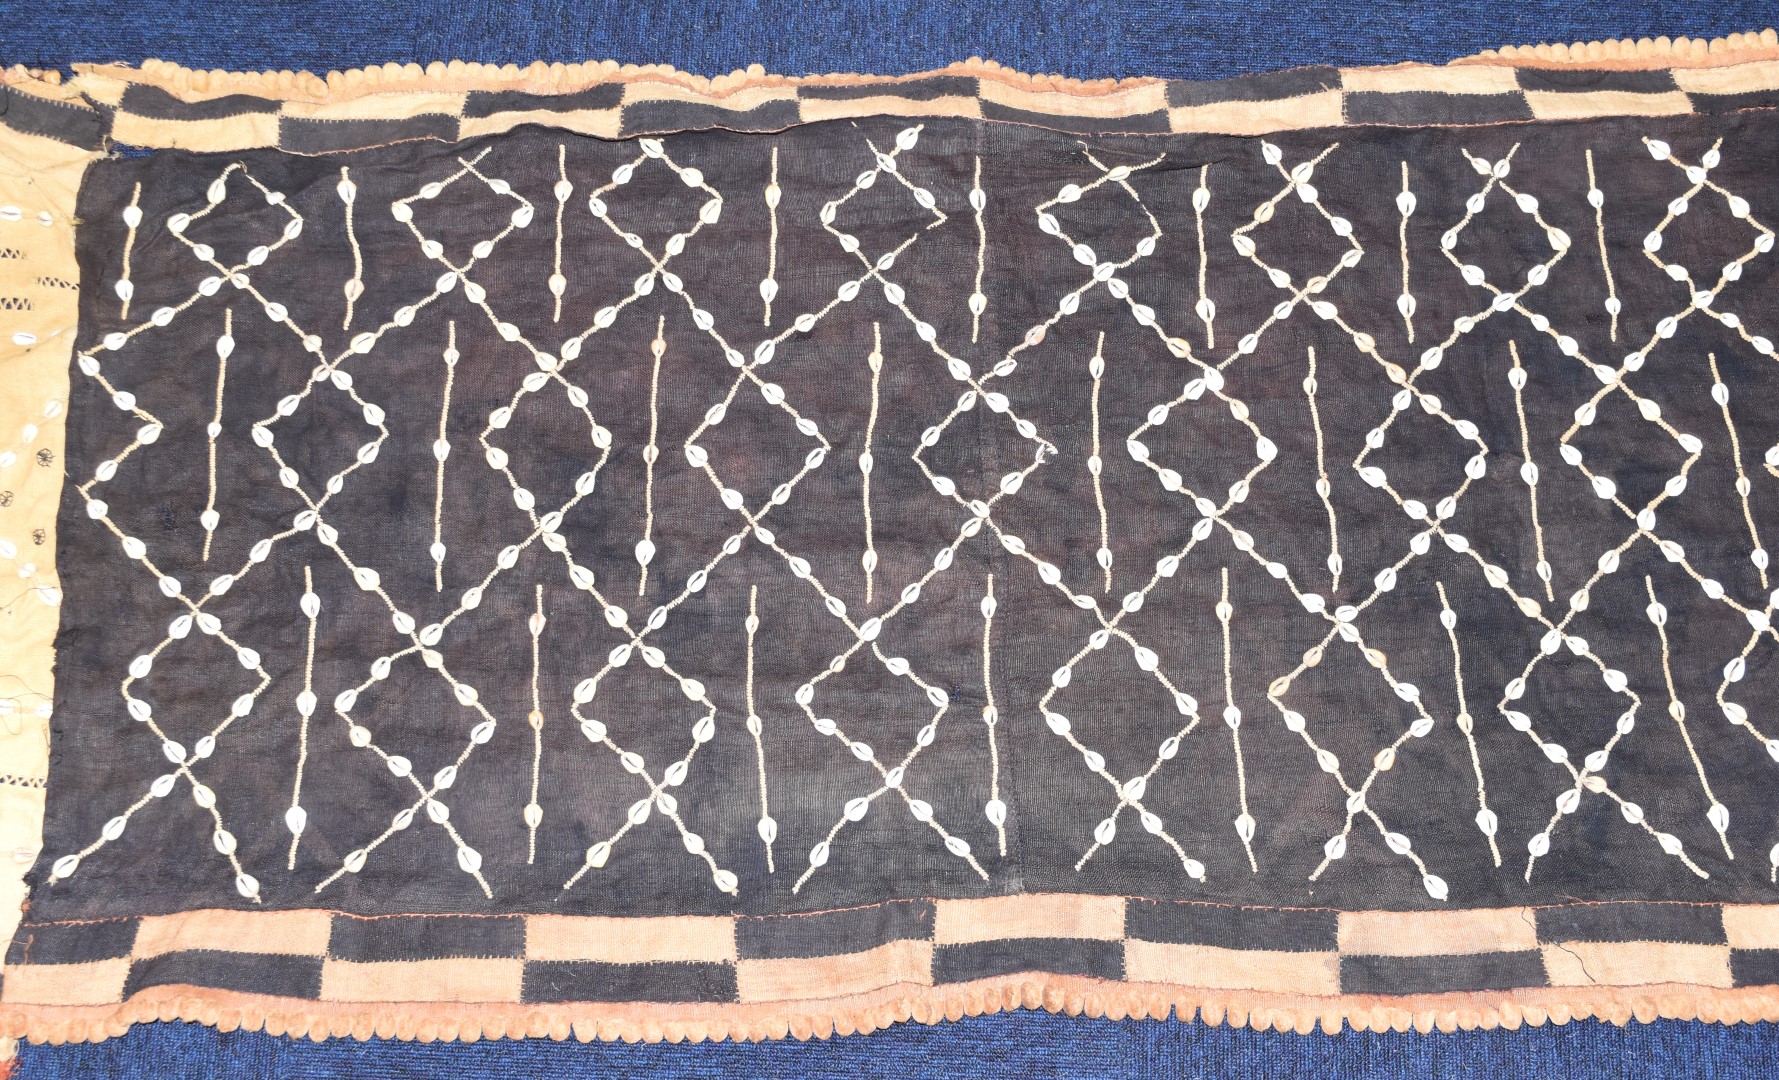 Four probably late 19th / 20thC African tribal embroidered tapestries or wall hangings with - Image 7 of 10